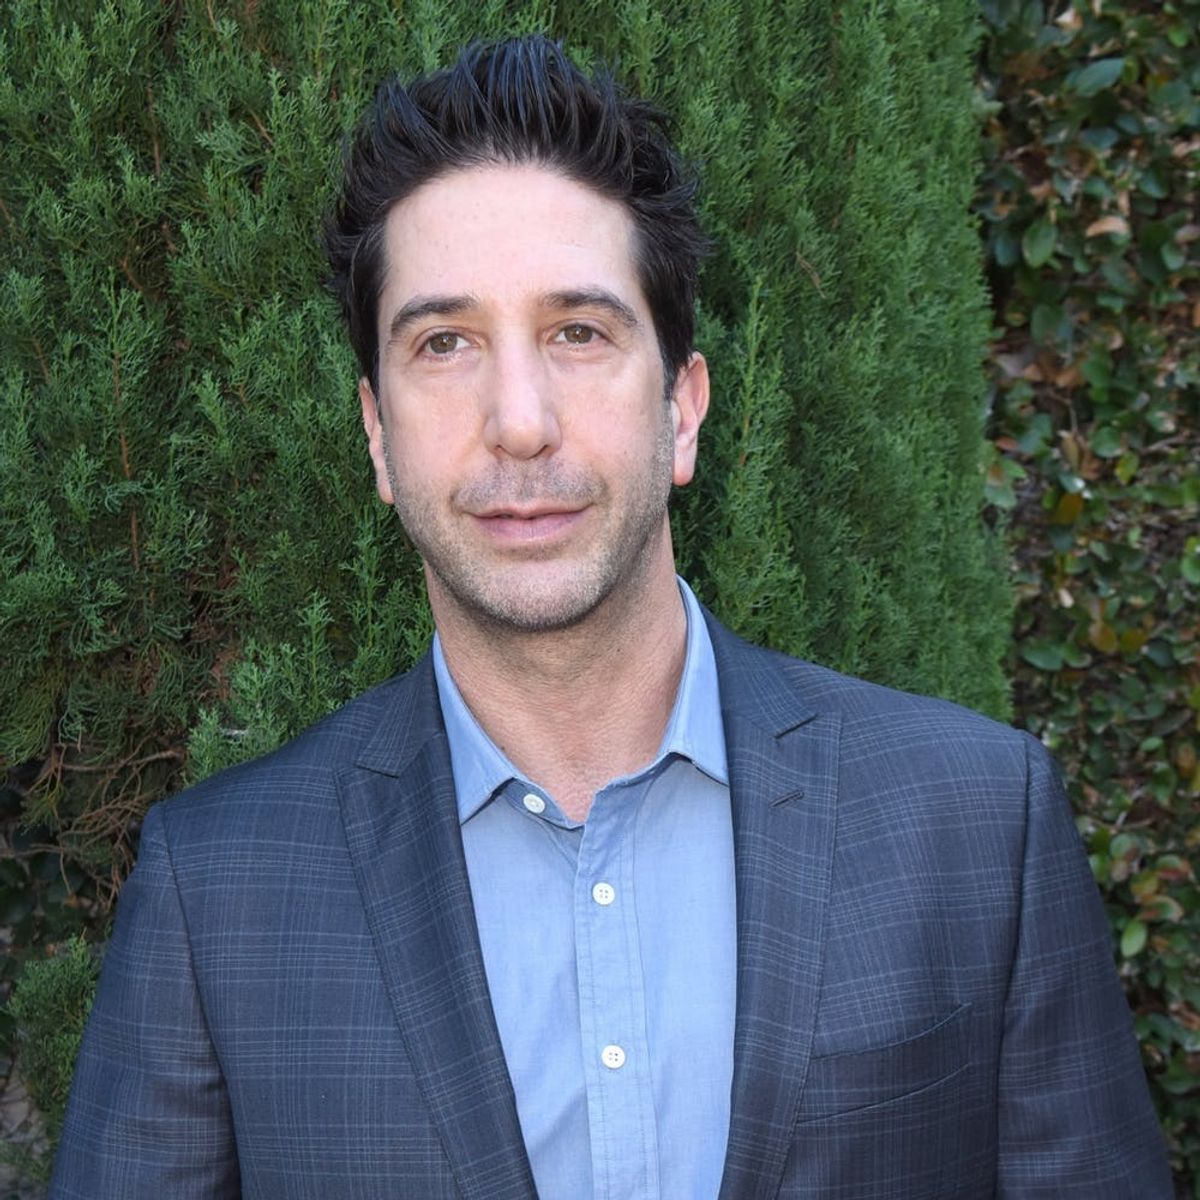 Female Film Critic Says David Schwimmer Offered to Have a Chaperone at Their Hotel Interview